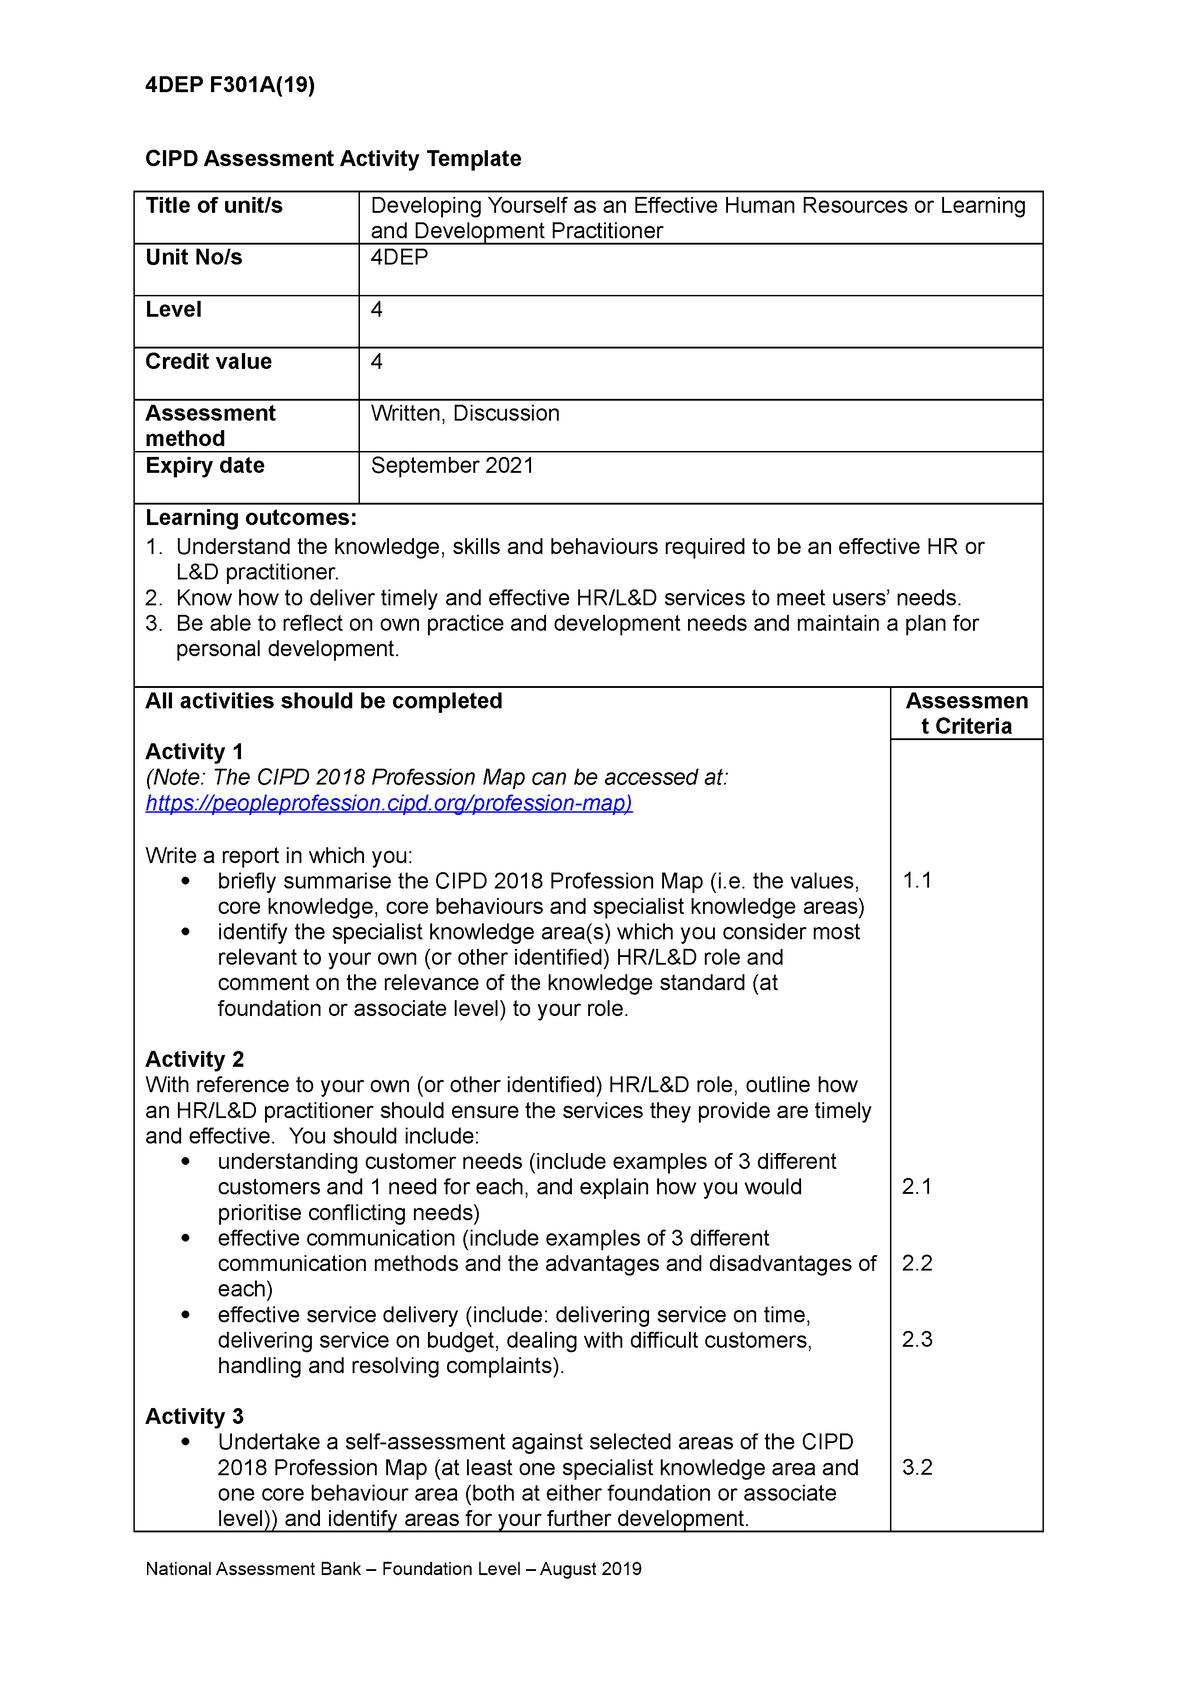 cipd level 3 assignment 2